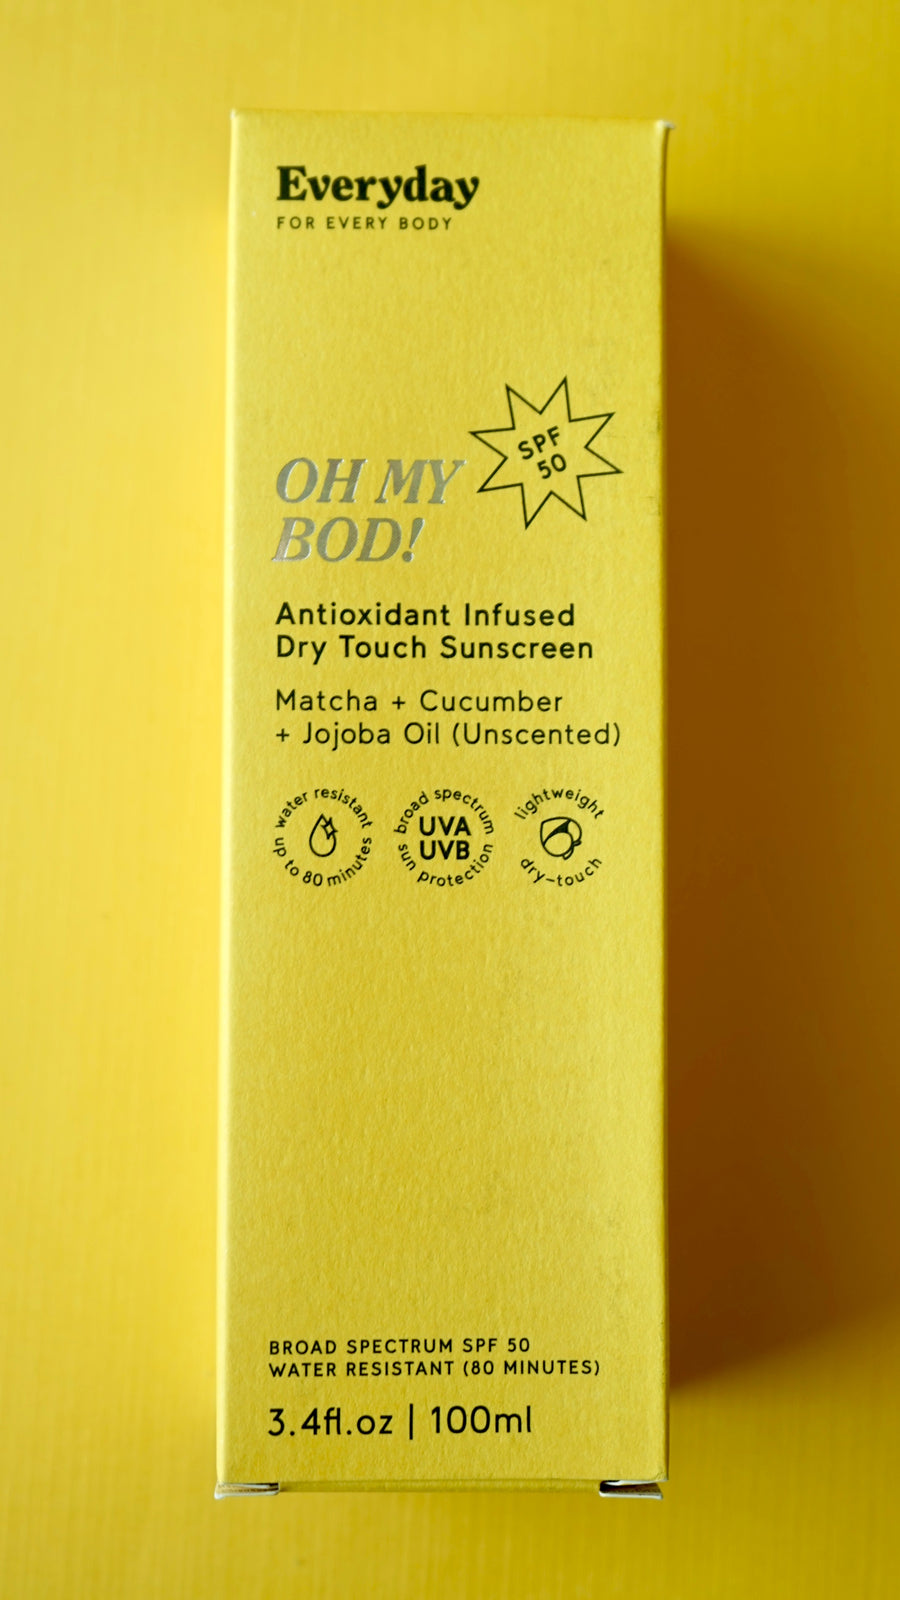 Oh My Bod! SPF 50 Sunscreen by Everyday for Every Body 